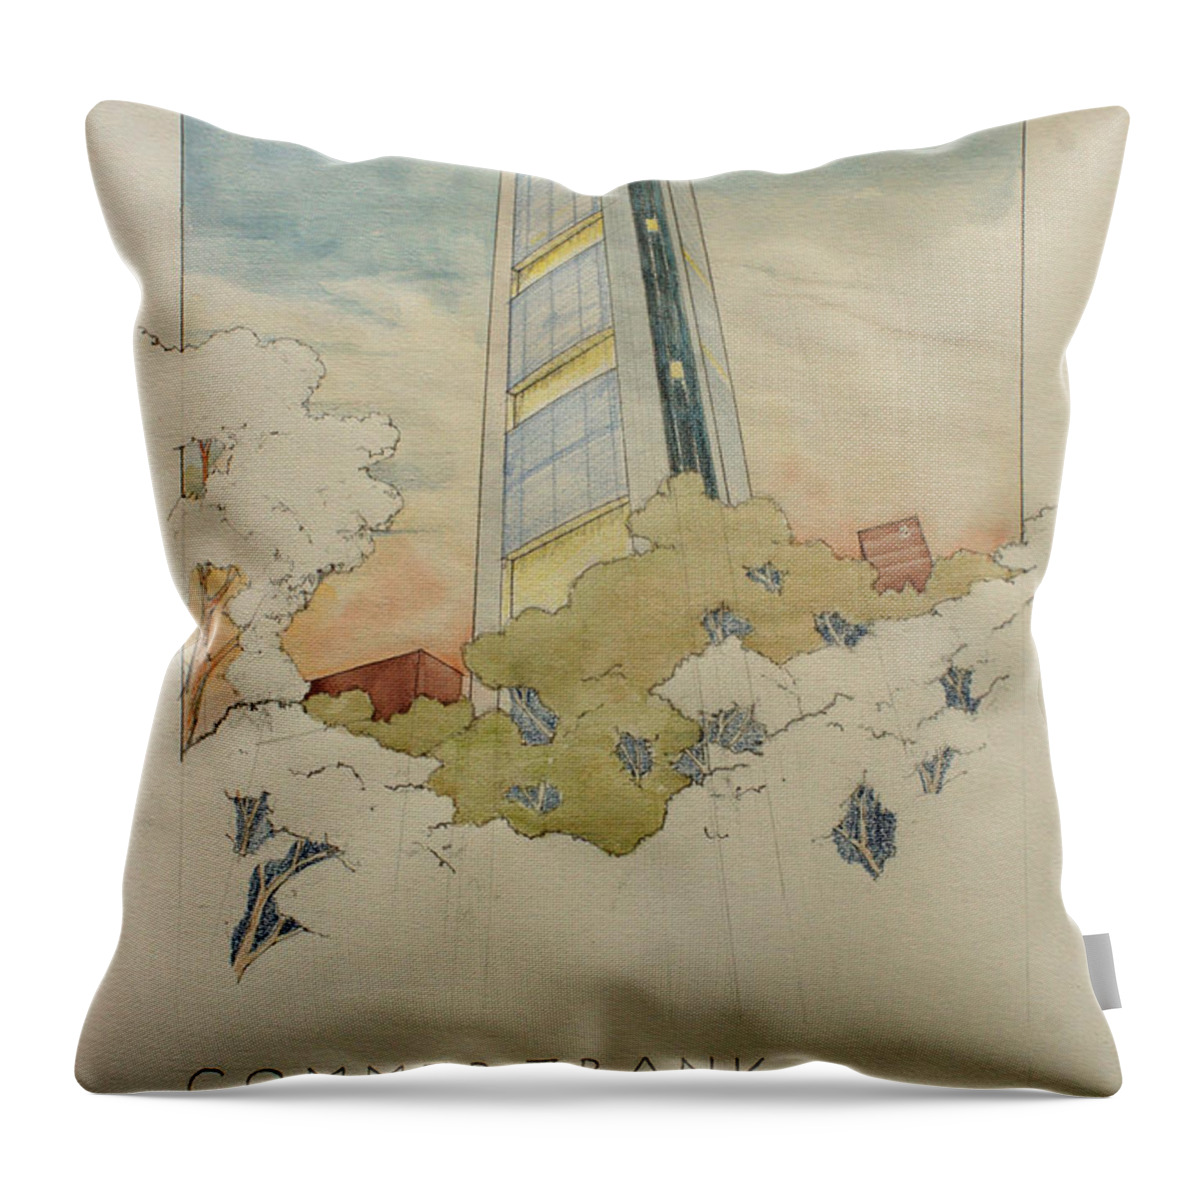 Commerzbank Poster Throw Pillow featuring the painting Commerzbank frankfurt by Juan Bosco